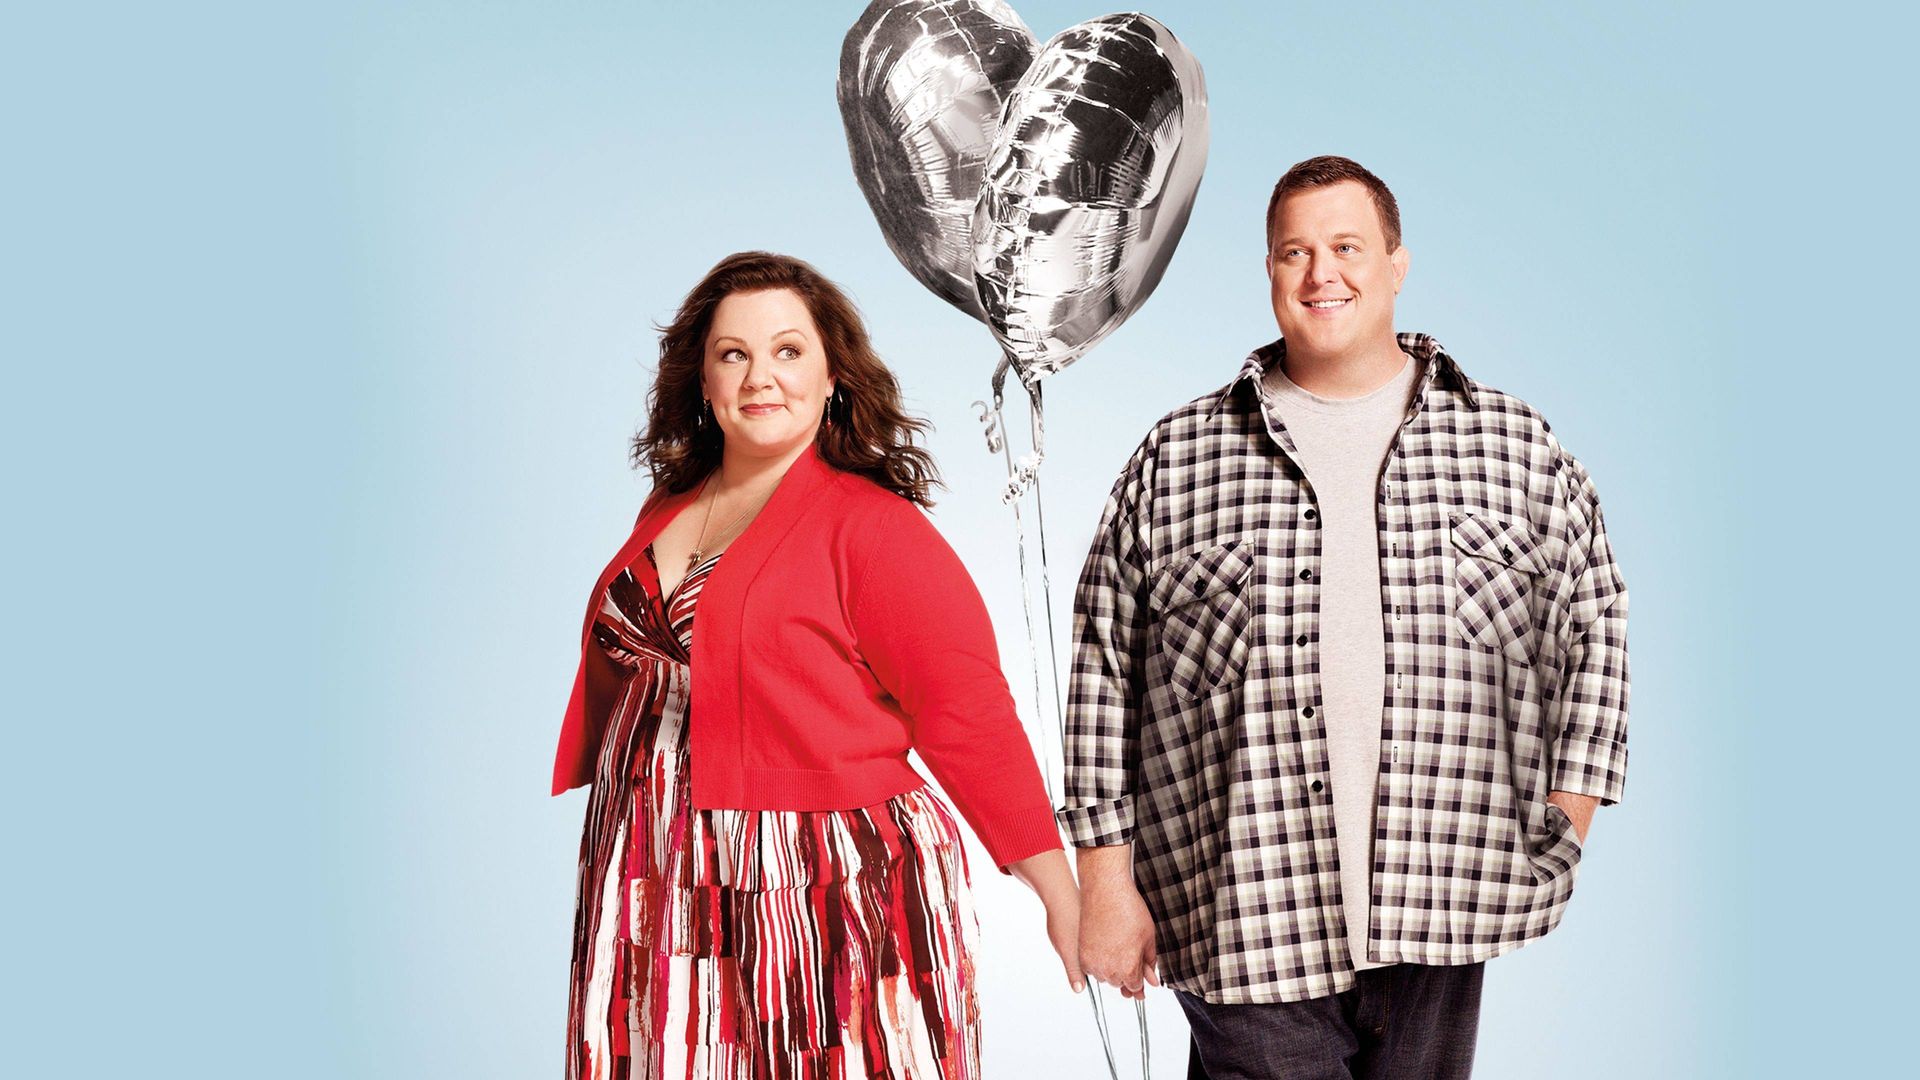 Mike & Molly Wallpapers